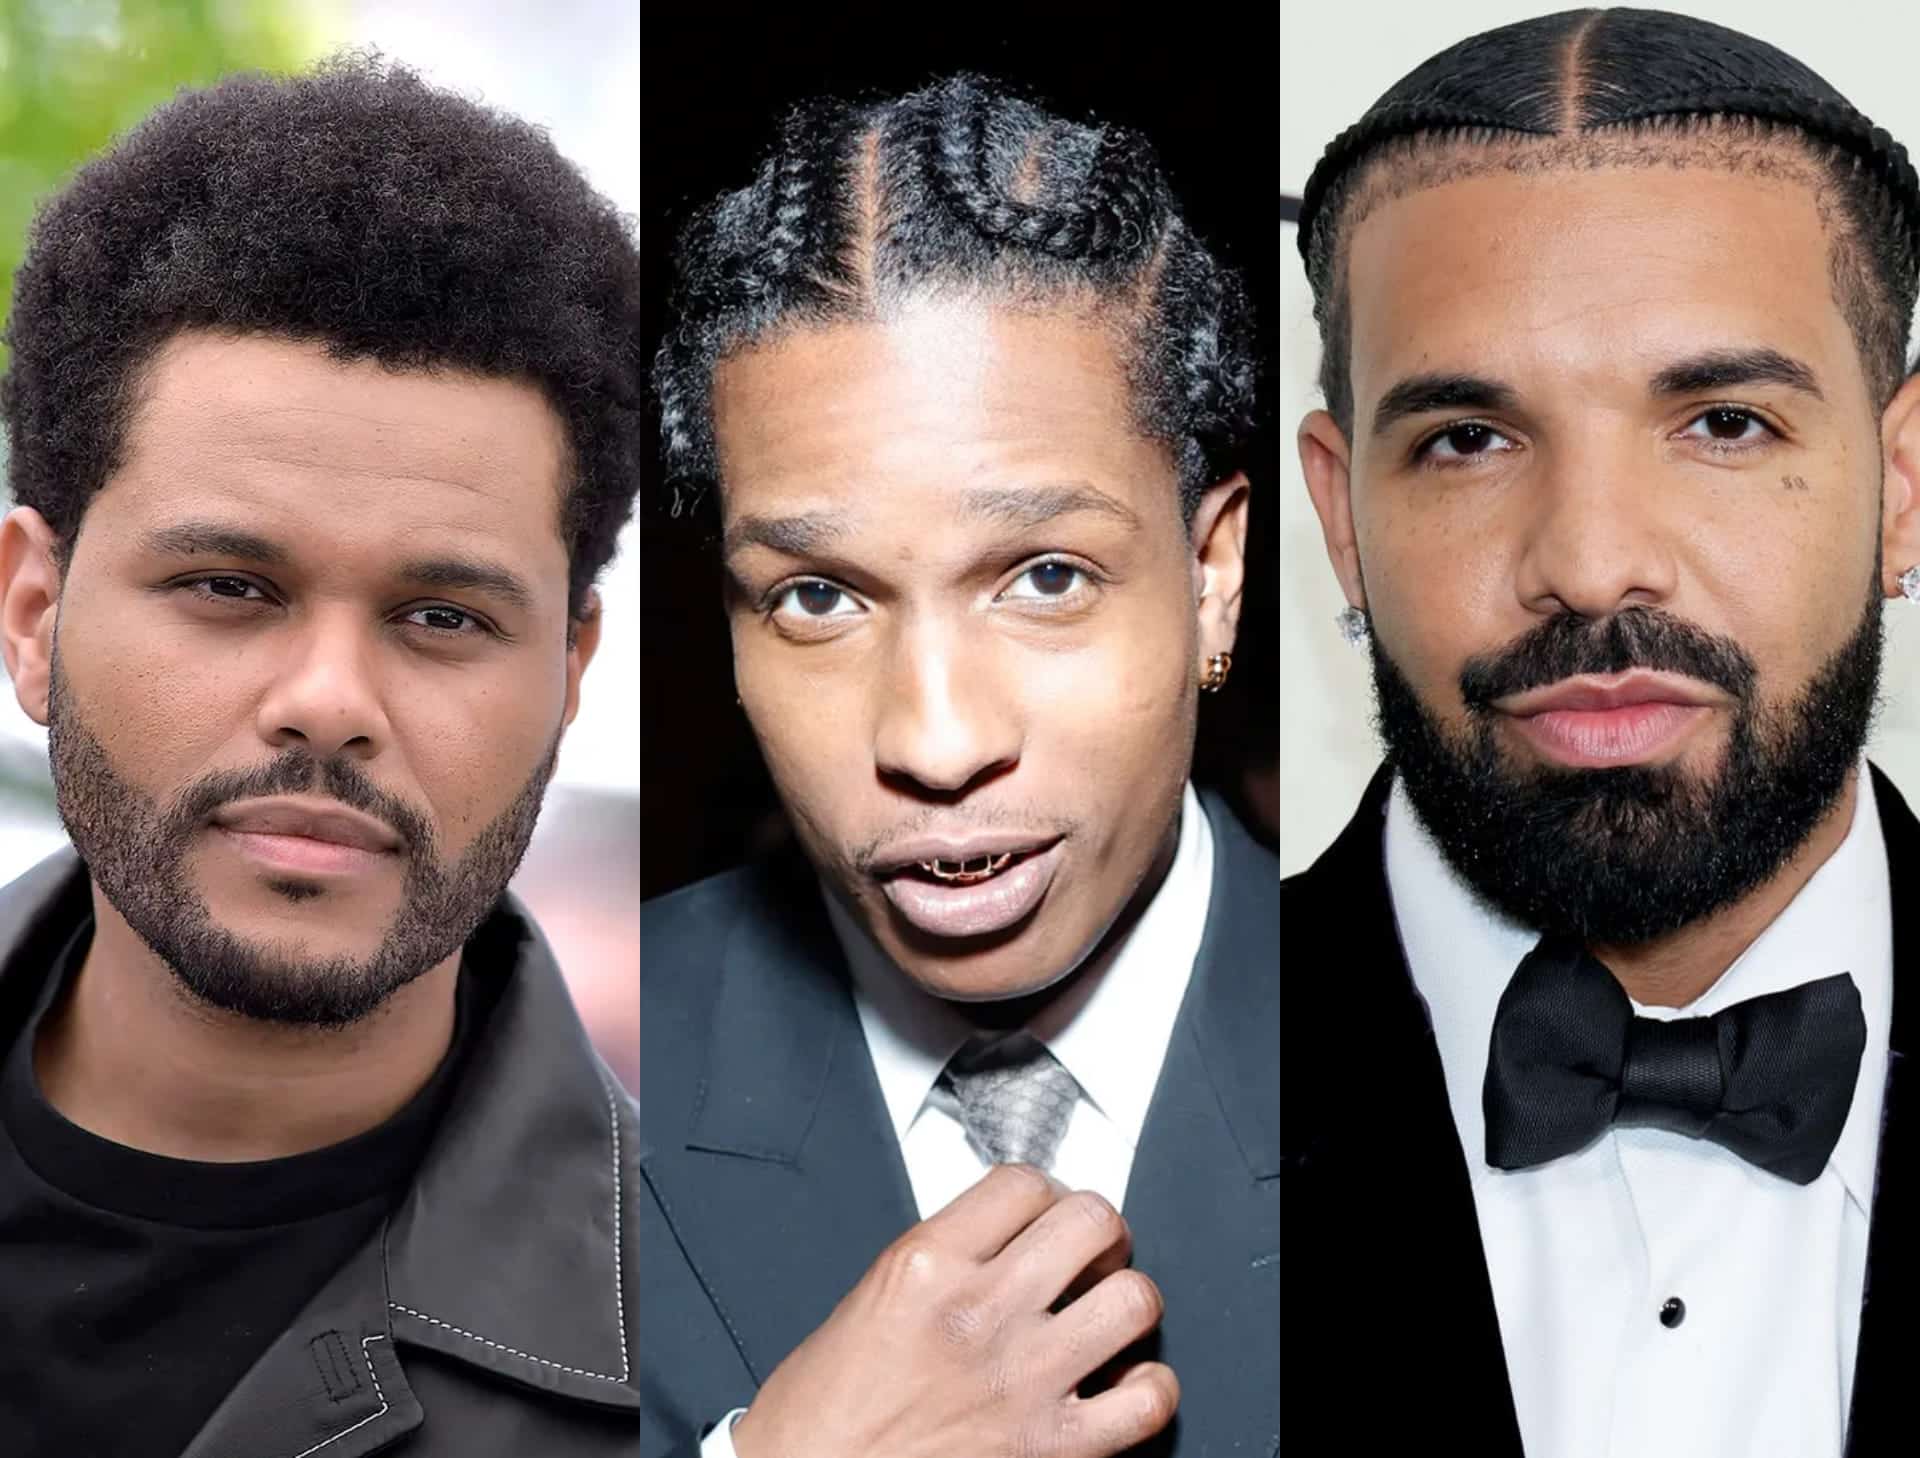 ASAP Rocky & The Weeknd Seemingly Disses Drake On New Future & Metro Boomin Album